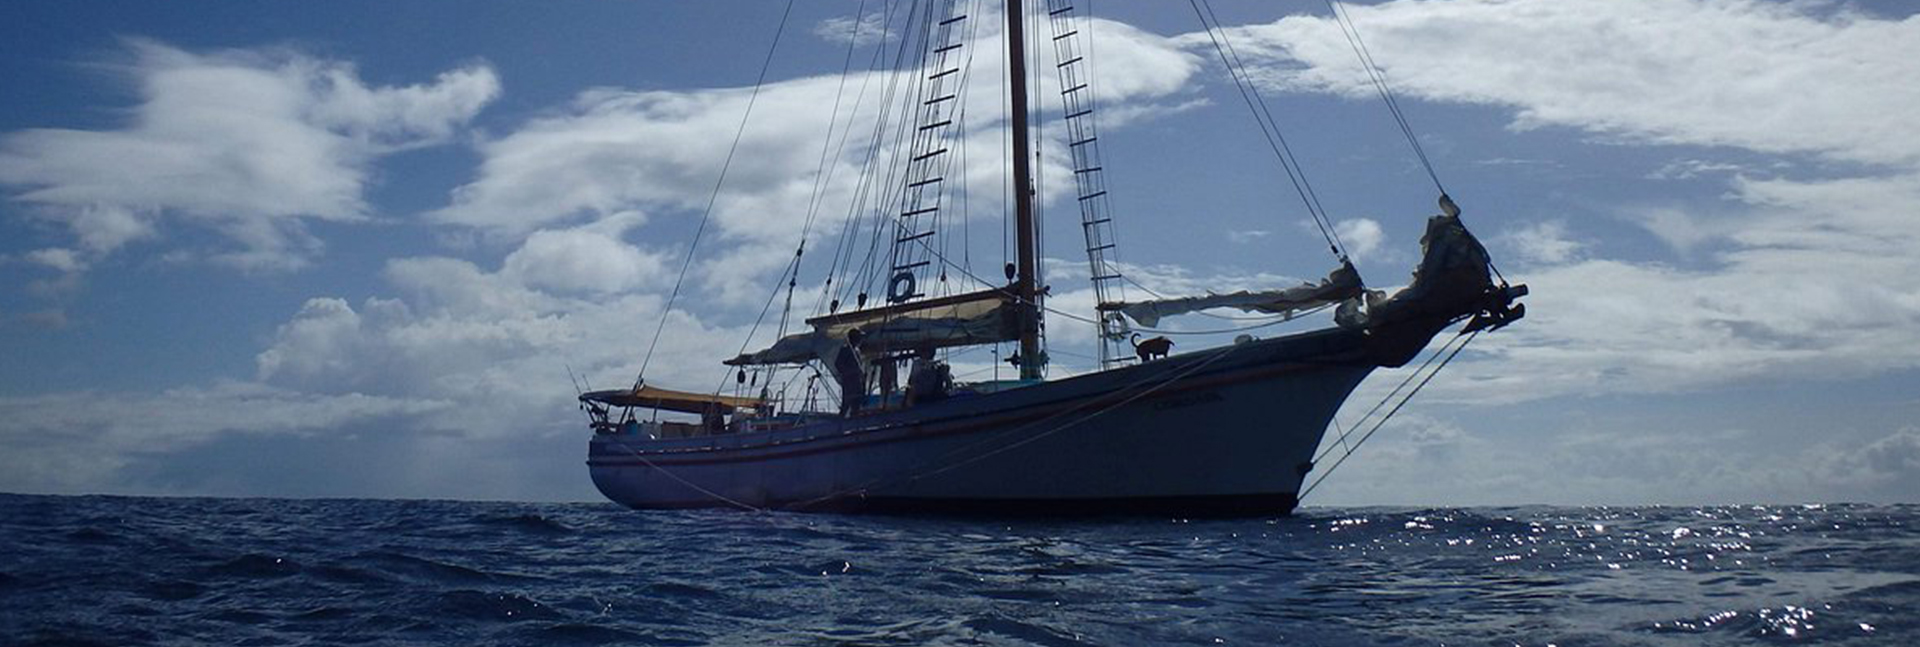 Corsair Sailing Charters and Experiences